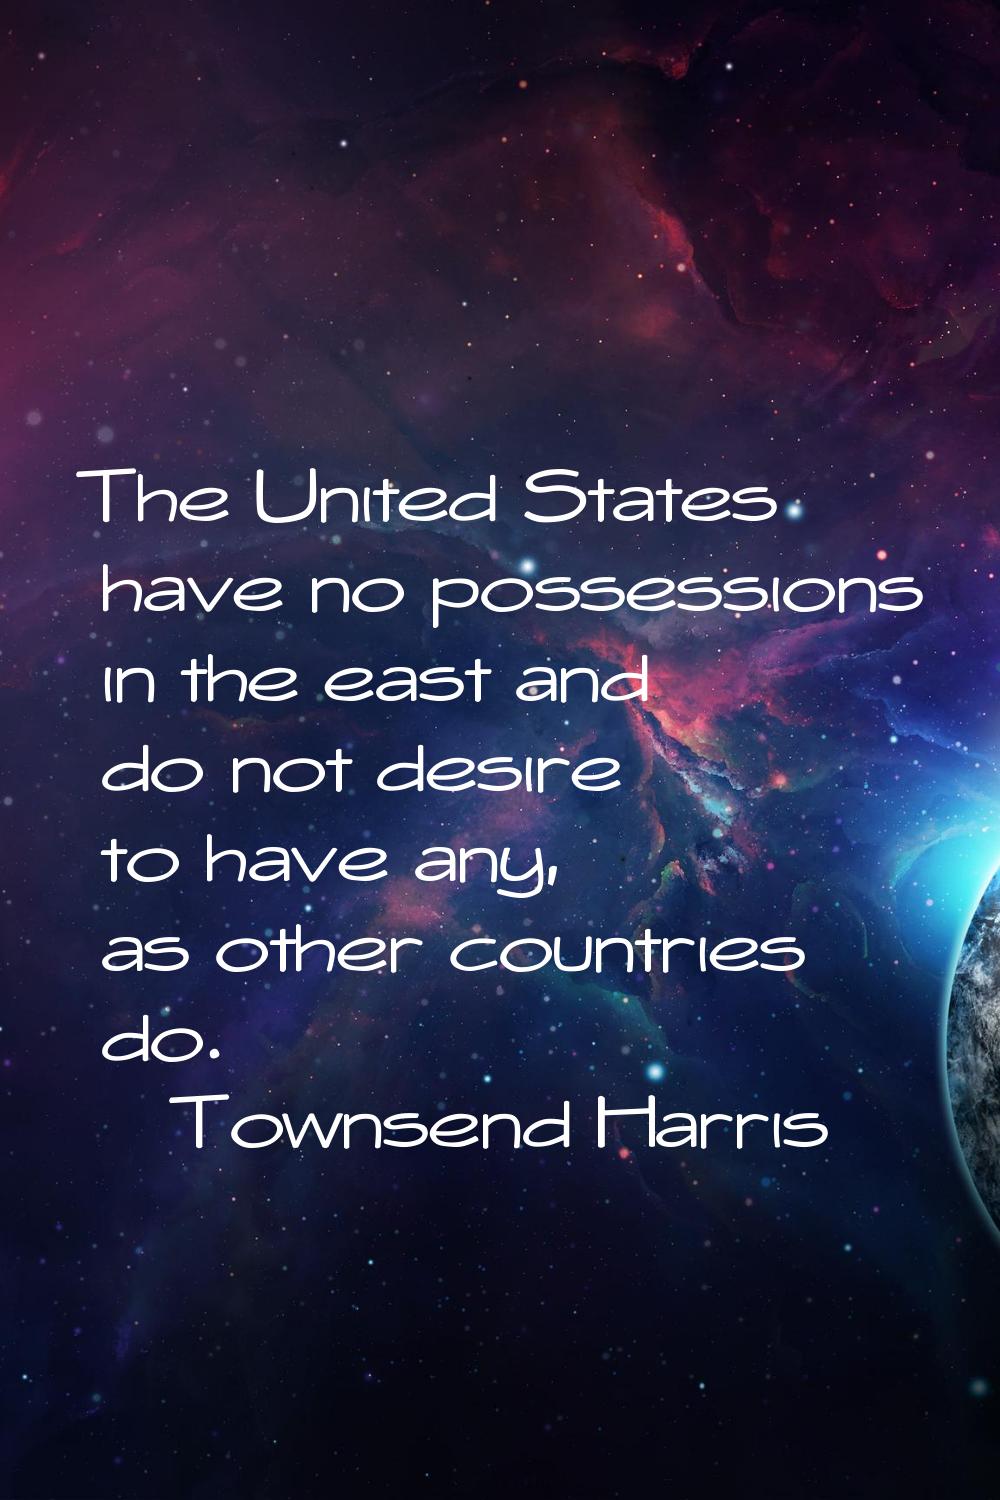 The United States have no possessions in the east and do not desire to have any, as other countries